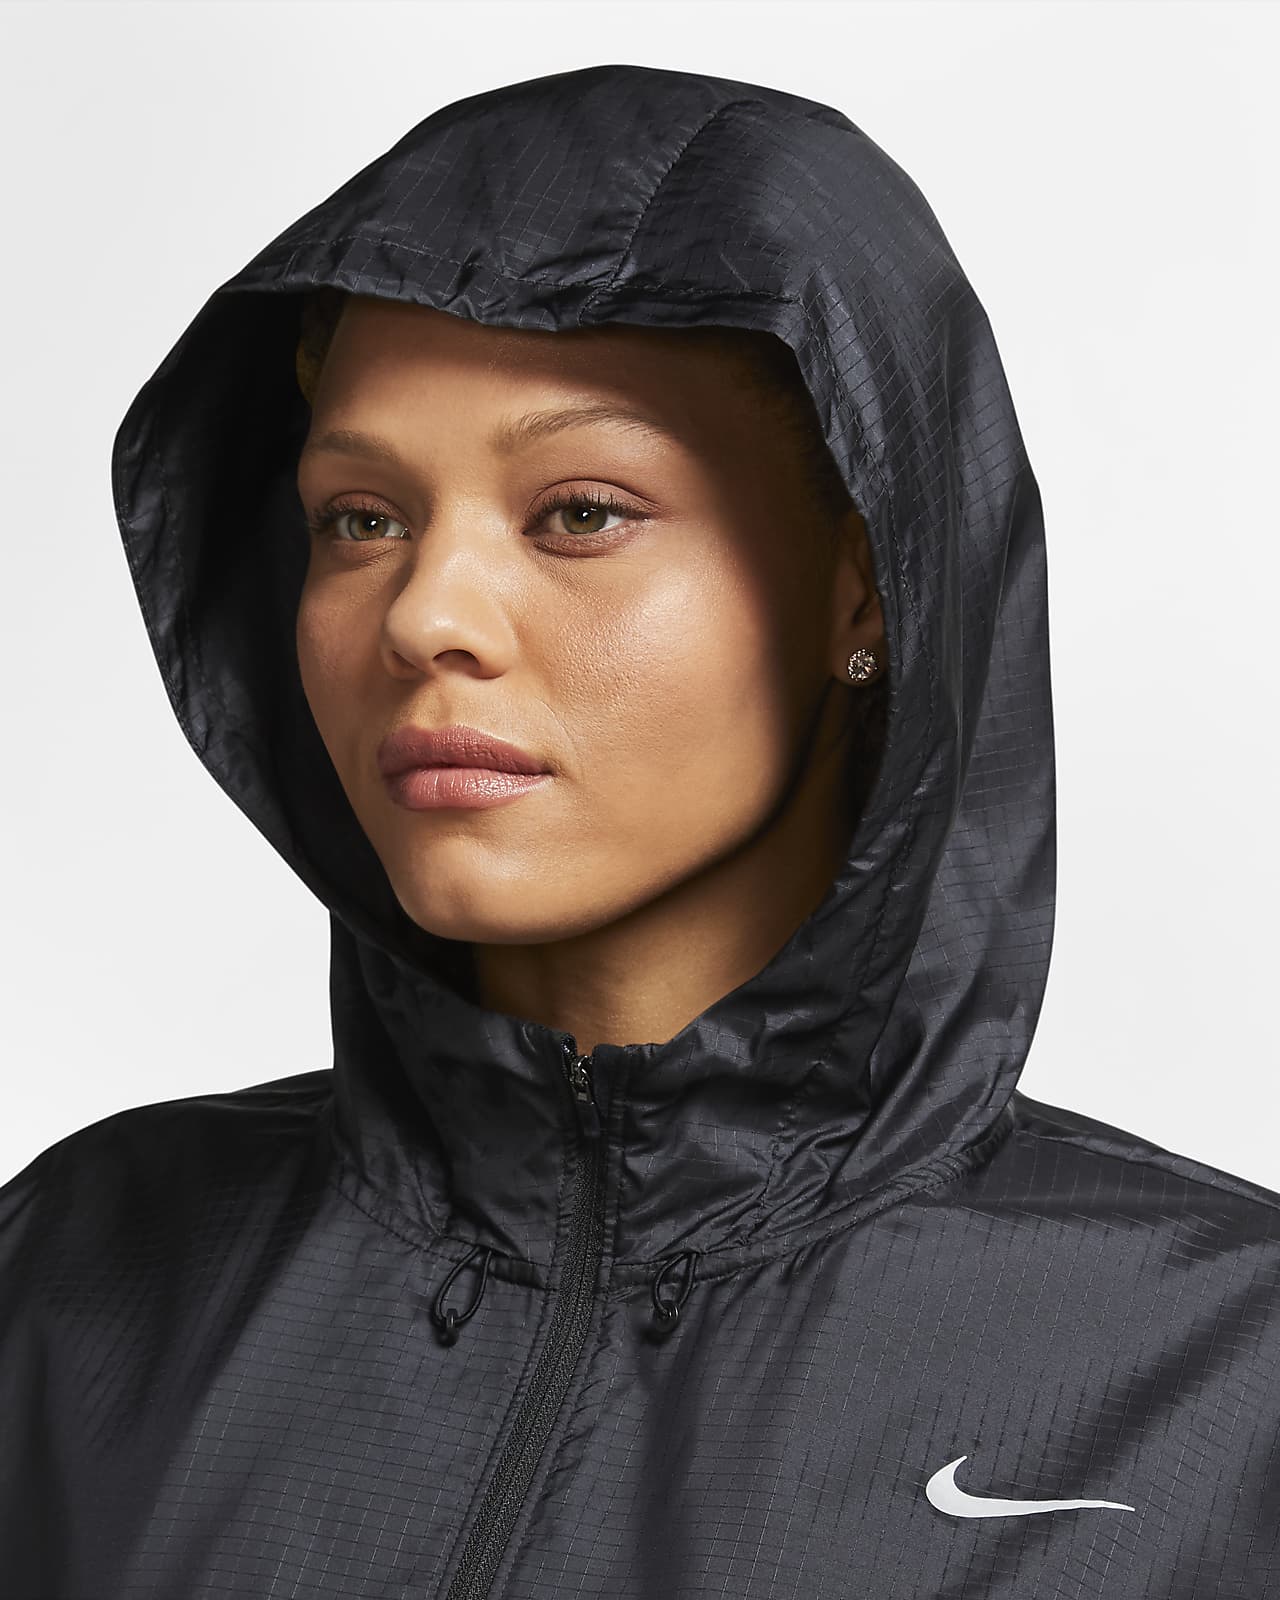 nike women's essential quilted running jacket